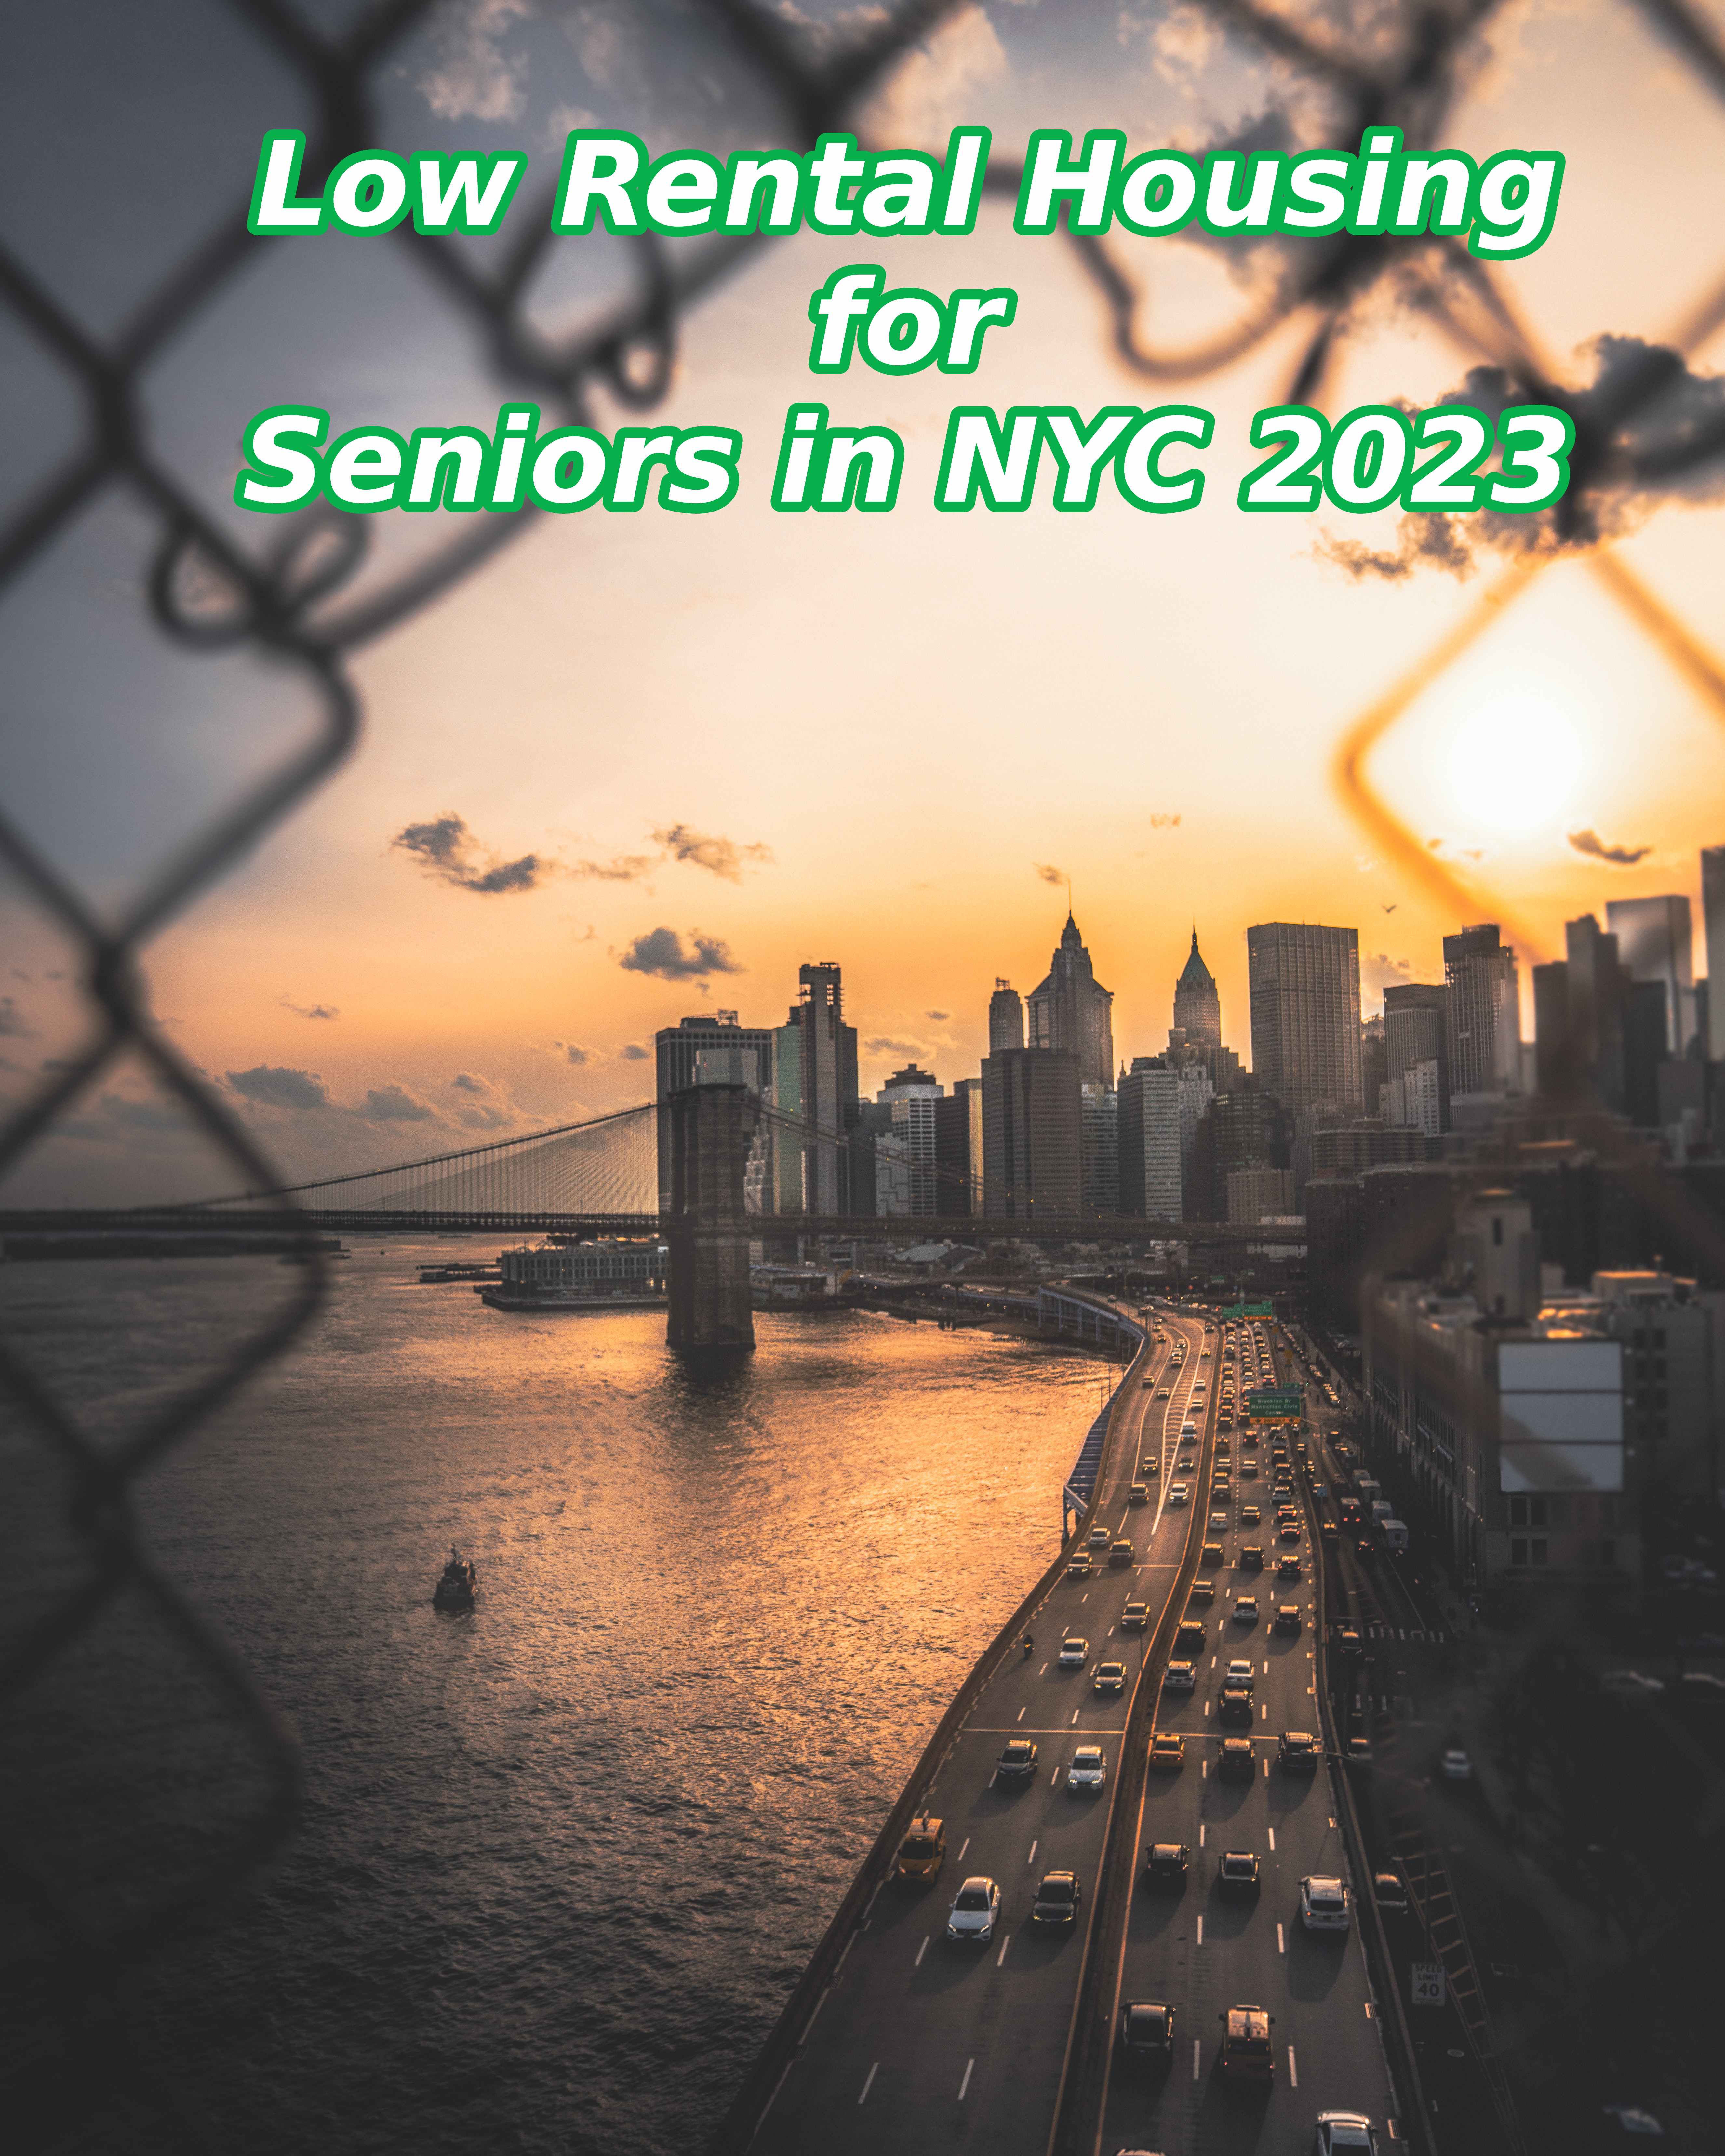 Low Rental Housing for Seniors in NYC 2023